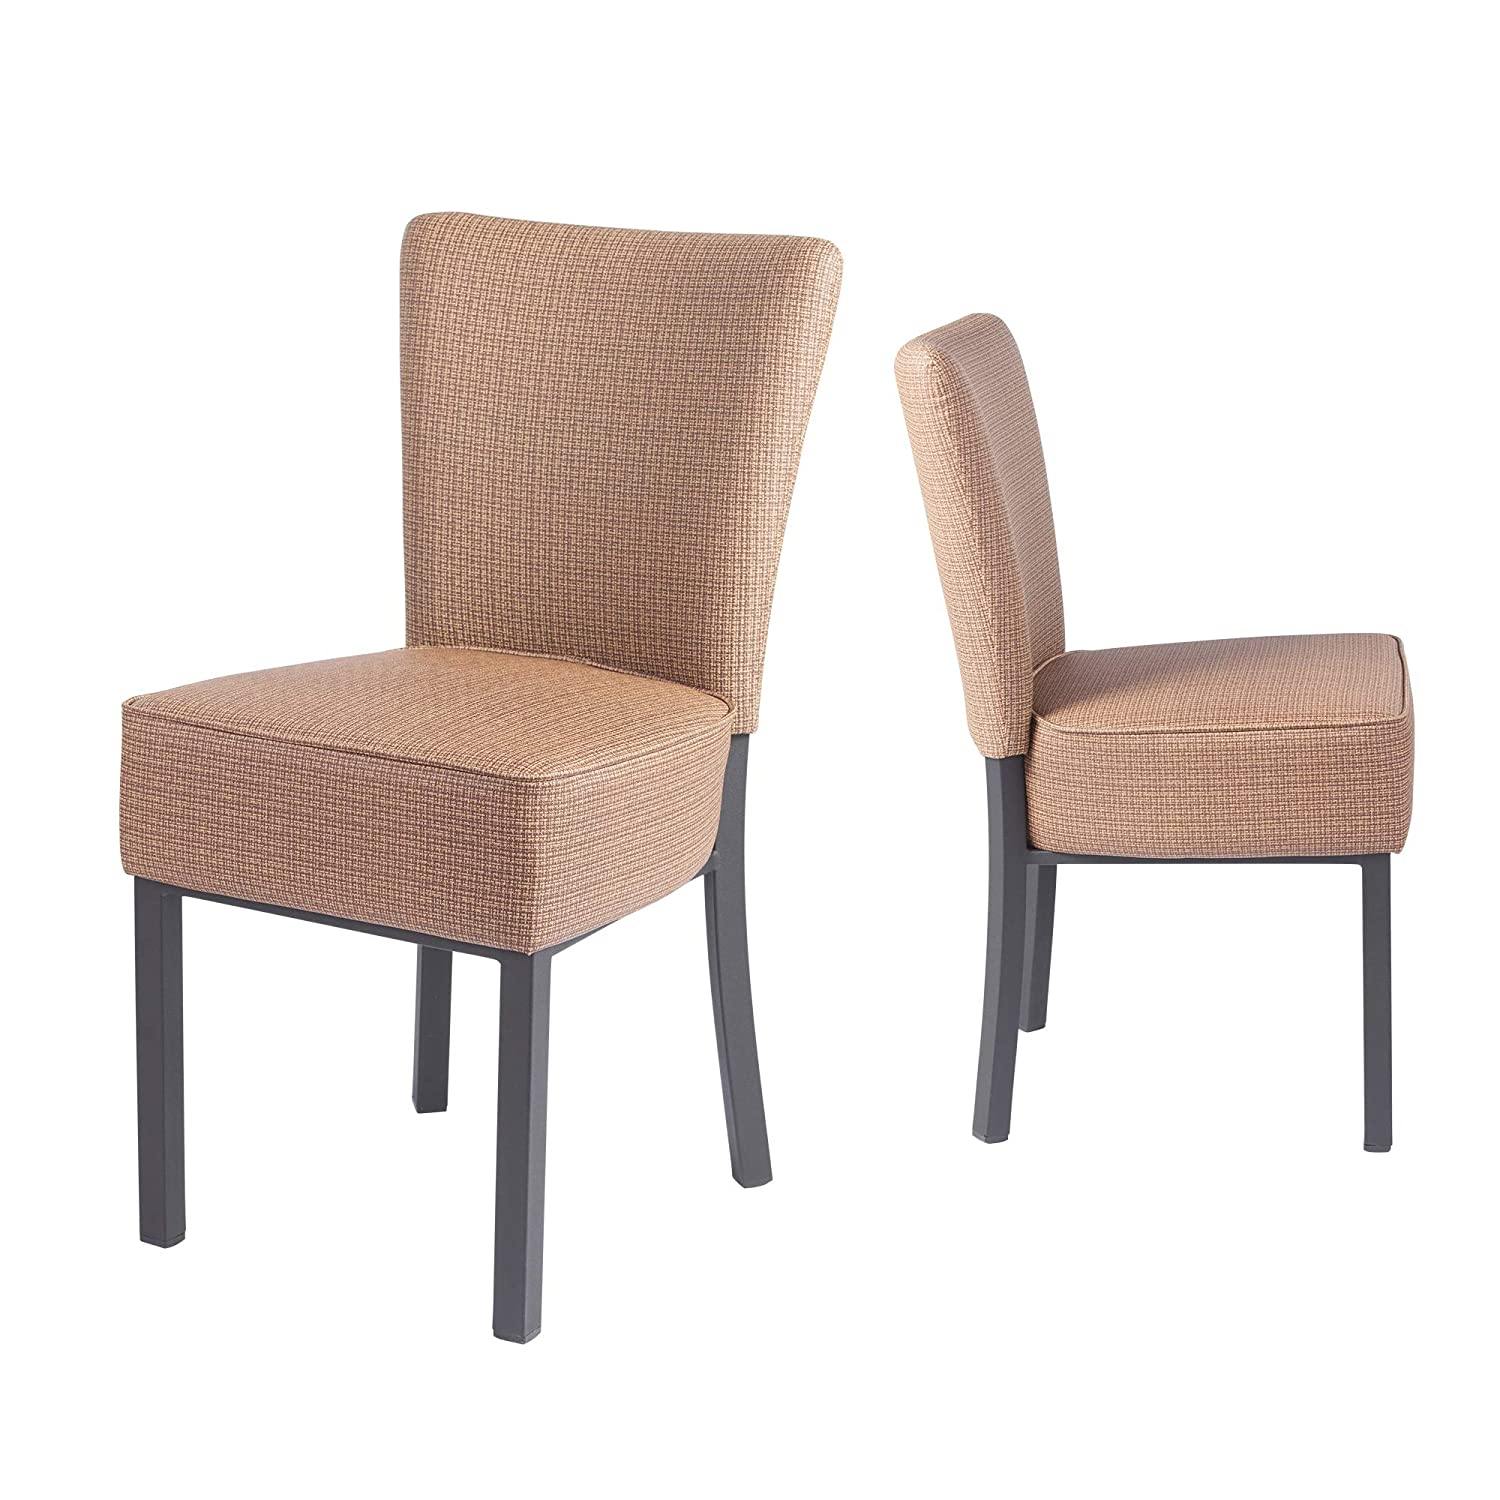 Upholstered Dining Chairs,Kitchen PU Leather Padded Chair, Modern Dining Room Furniture, Set of 2(Brown) - Bosonshop